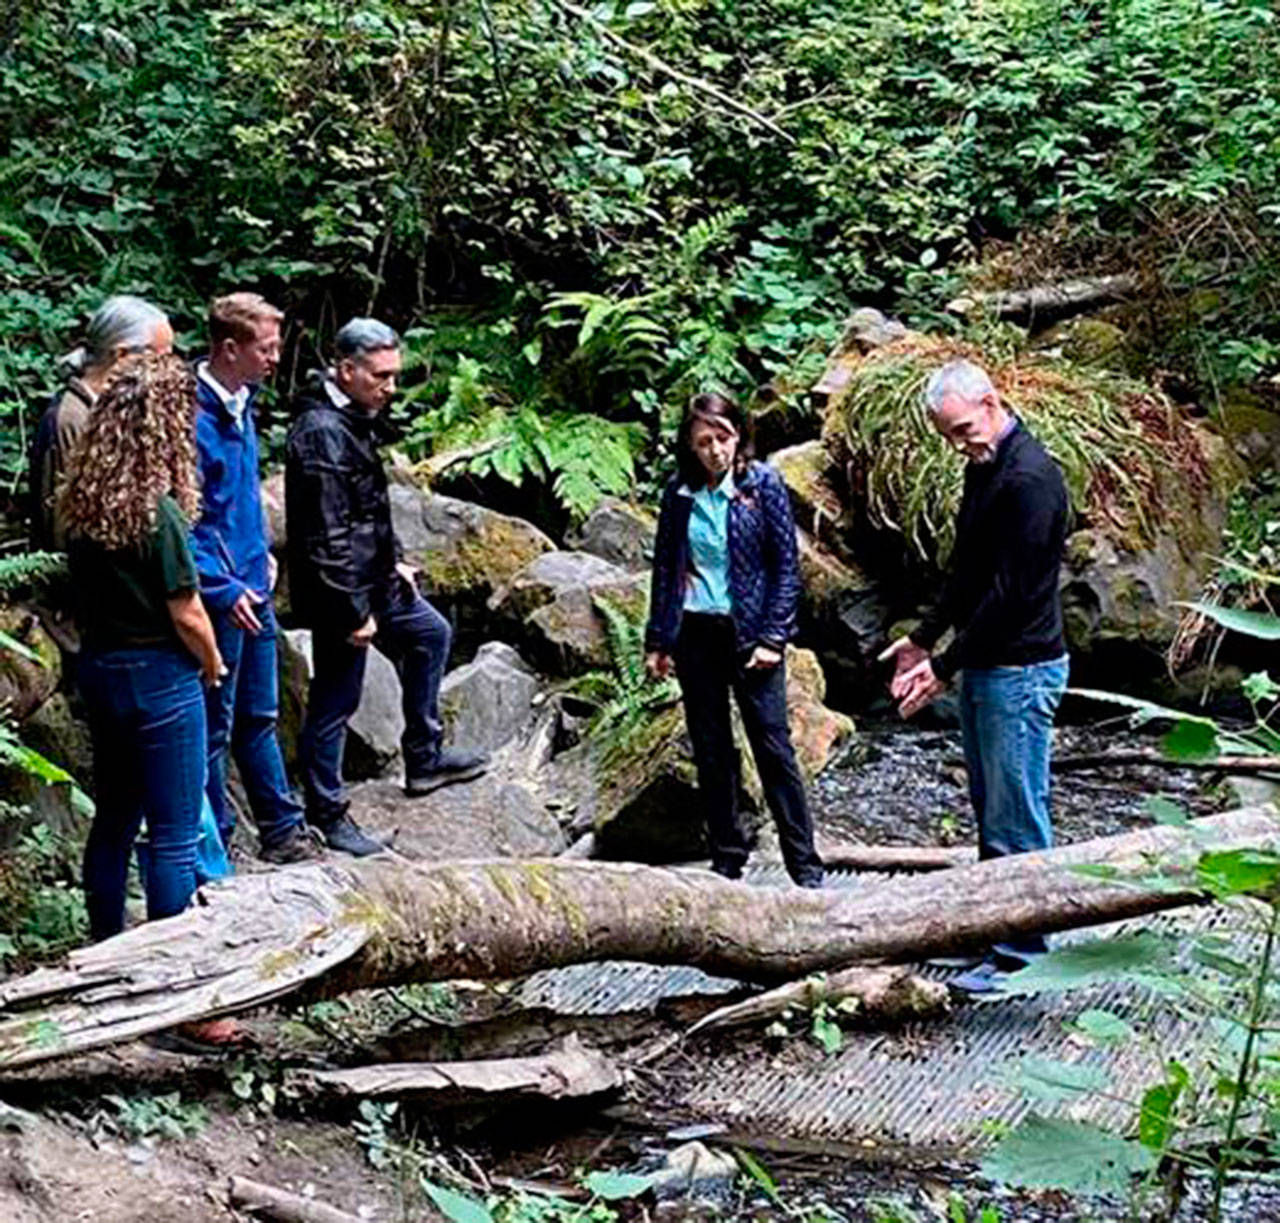 Courtesy of U.S. Rep. Derek Kilmer 
Evan Lewis, Special Projects Manager, King Country Fish Passage Restoration Program (right) shows example of a culvert in need of repair at Carkeek Park in Seattle to U.S. Sen. Maria Cantwell and U.S. Rep. Derek Kilmer.